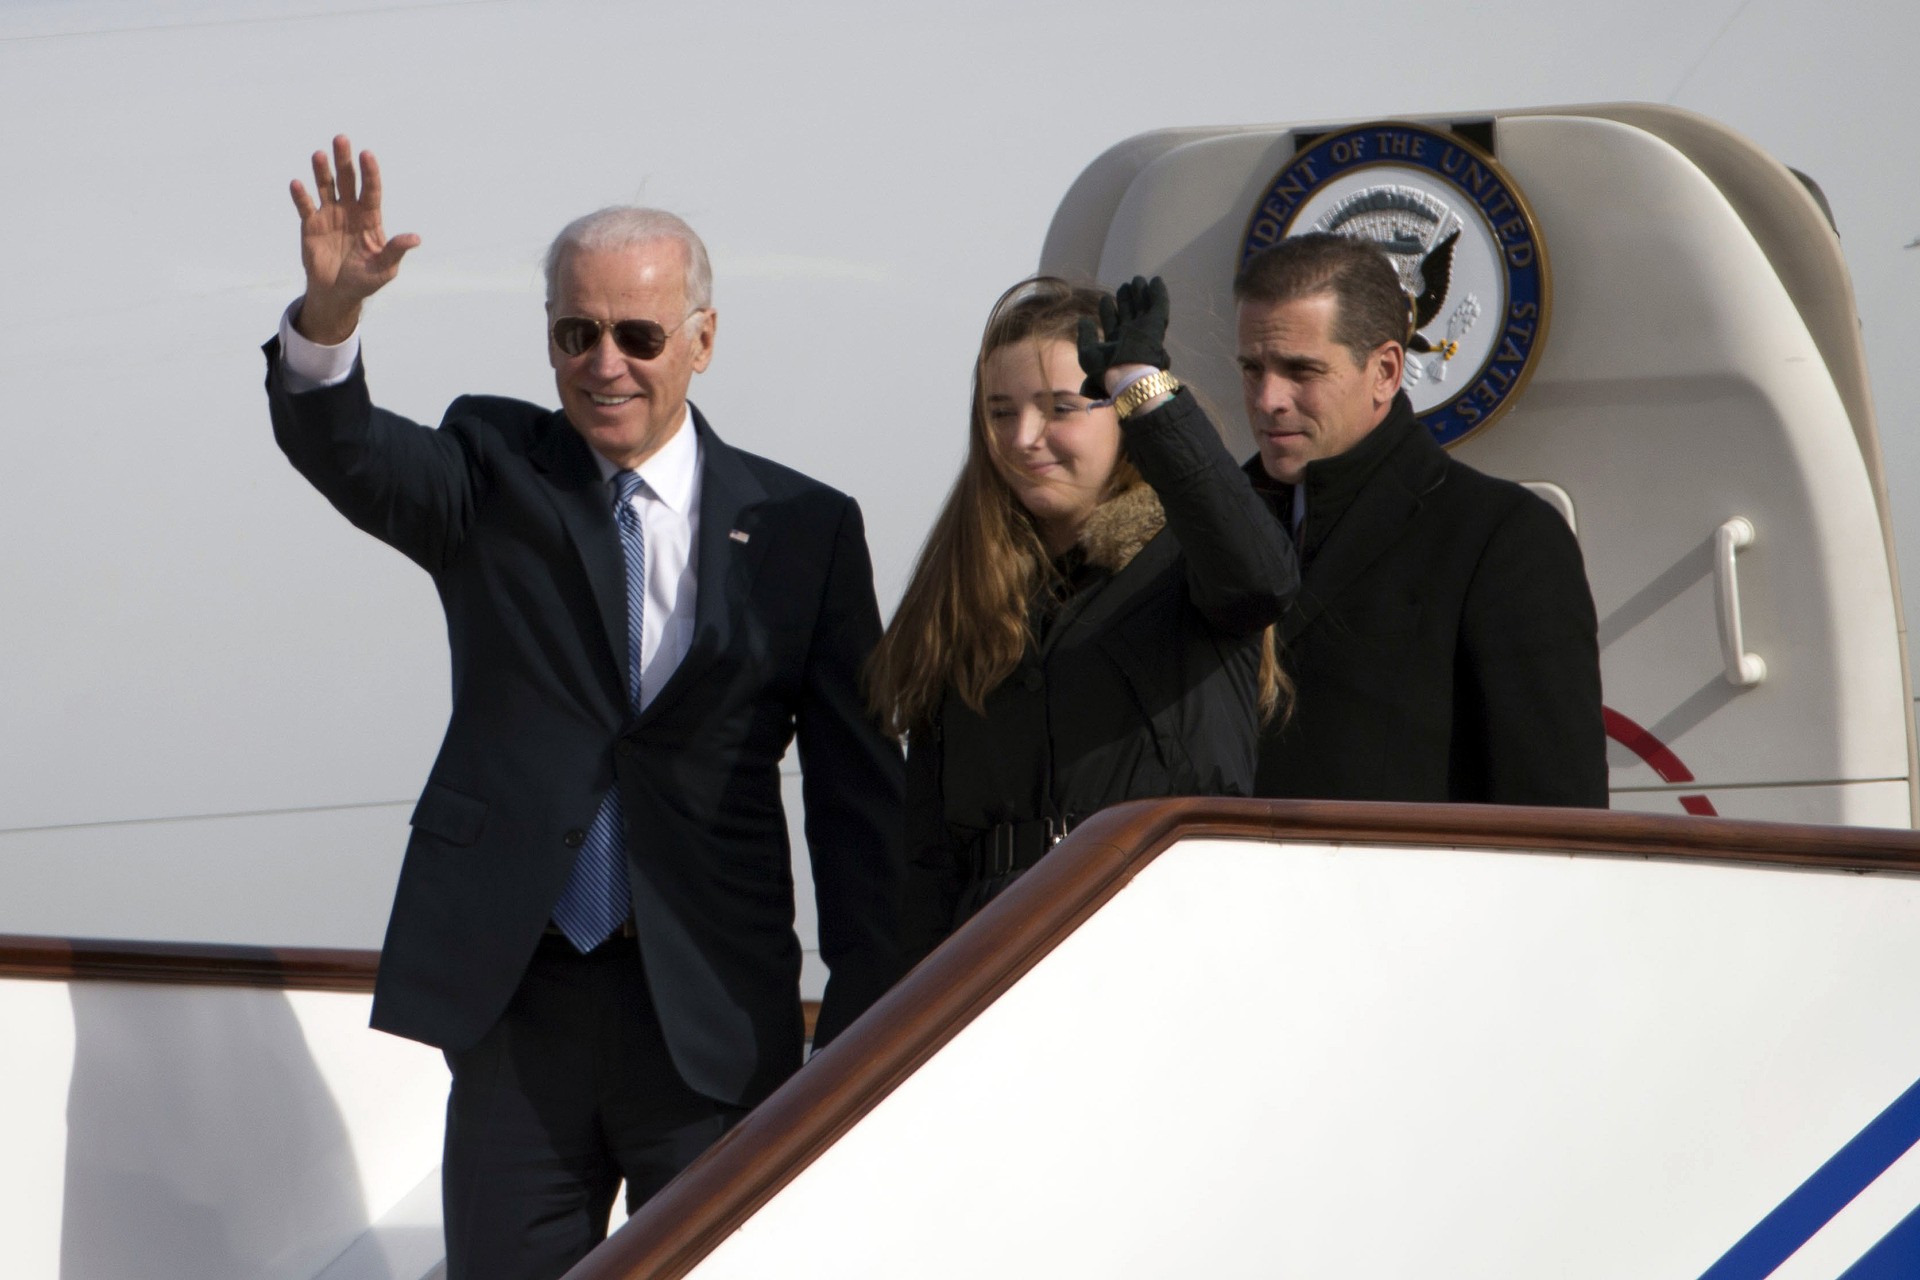 Hunter is President Biden’s “informal adviser” despite being the reason for father’s impeachment inquiry, NYT reports – NaturalNews.com